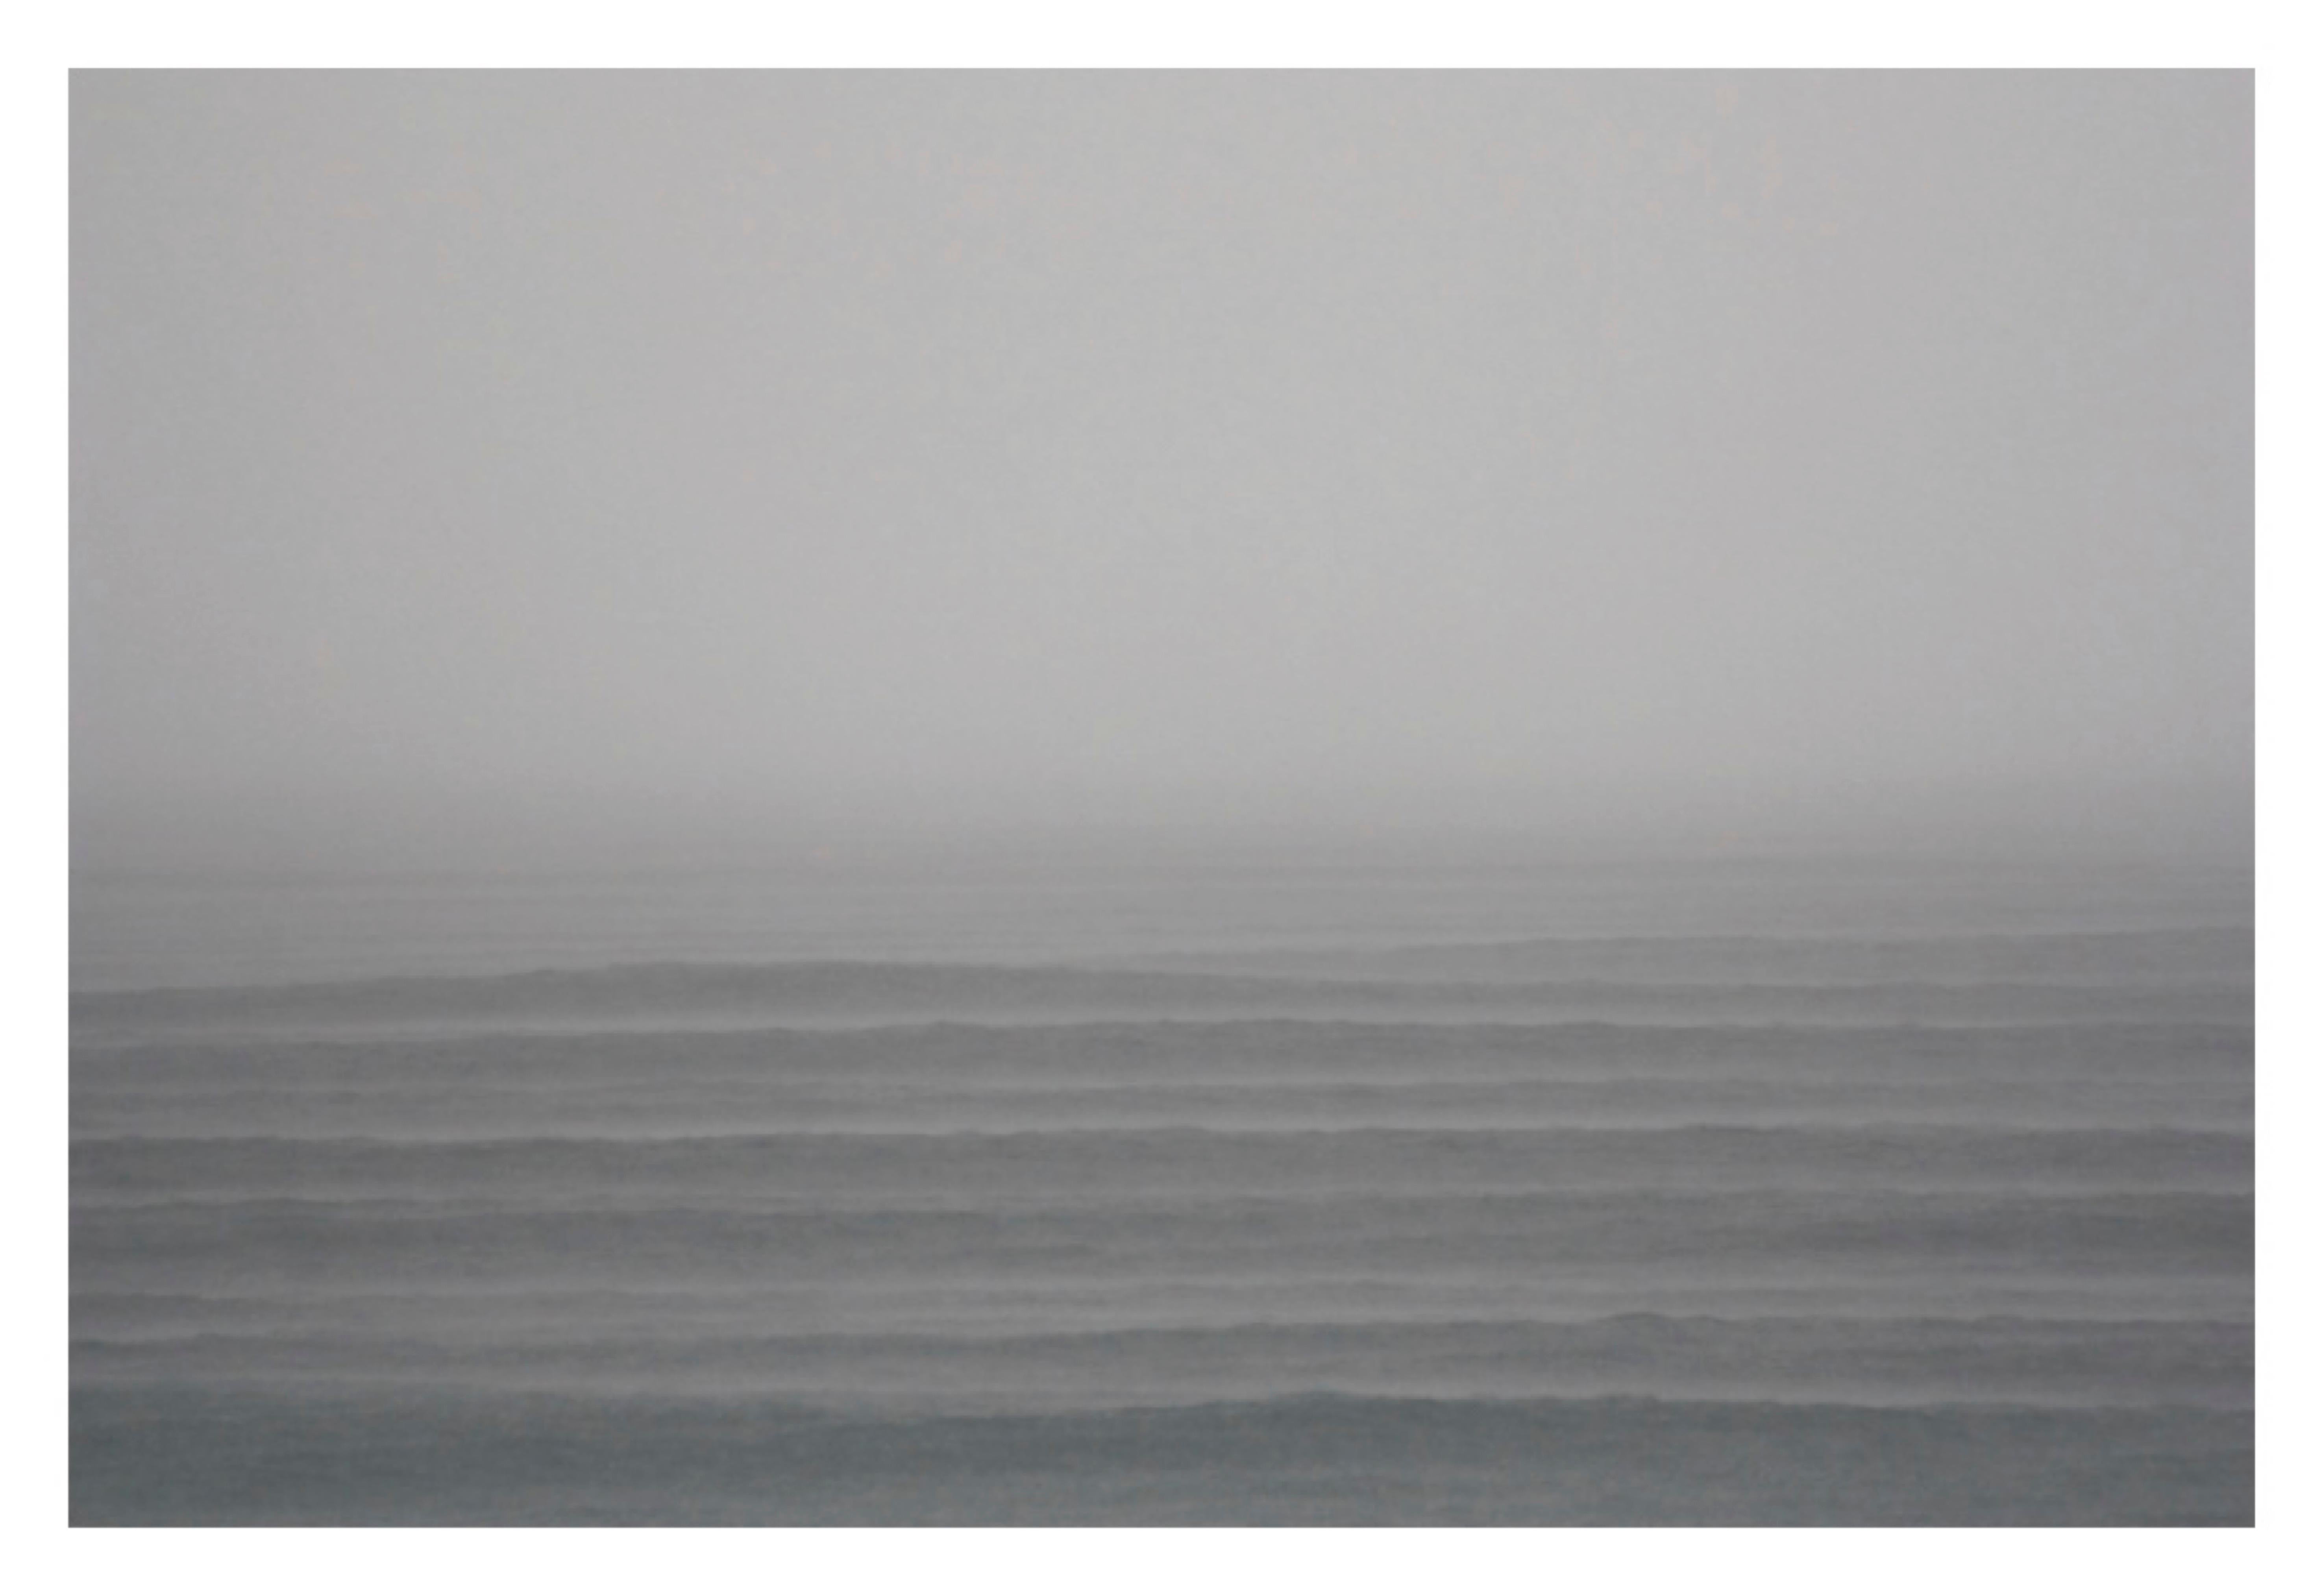 Calm Sea -  Oversize Signed Limited Edition Print 